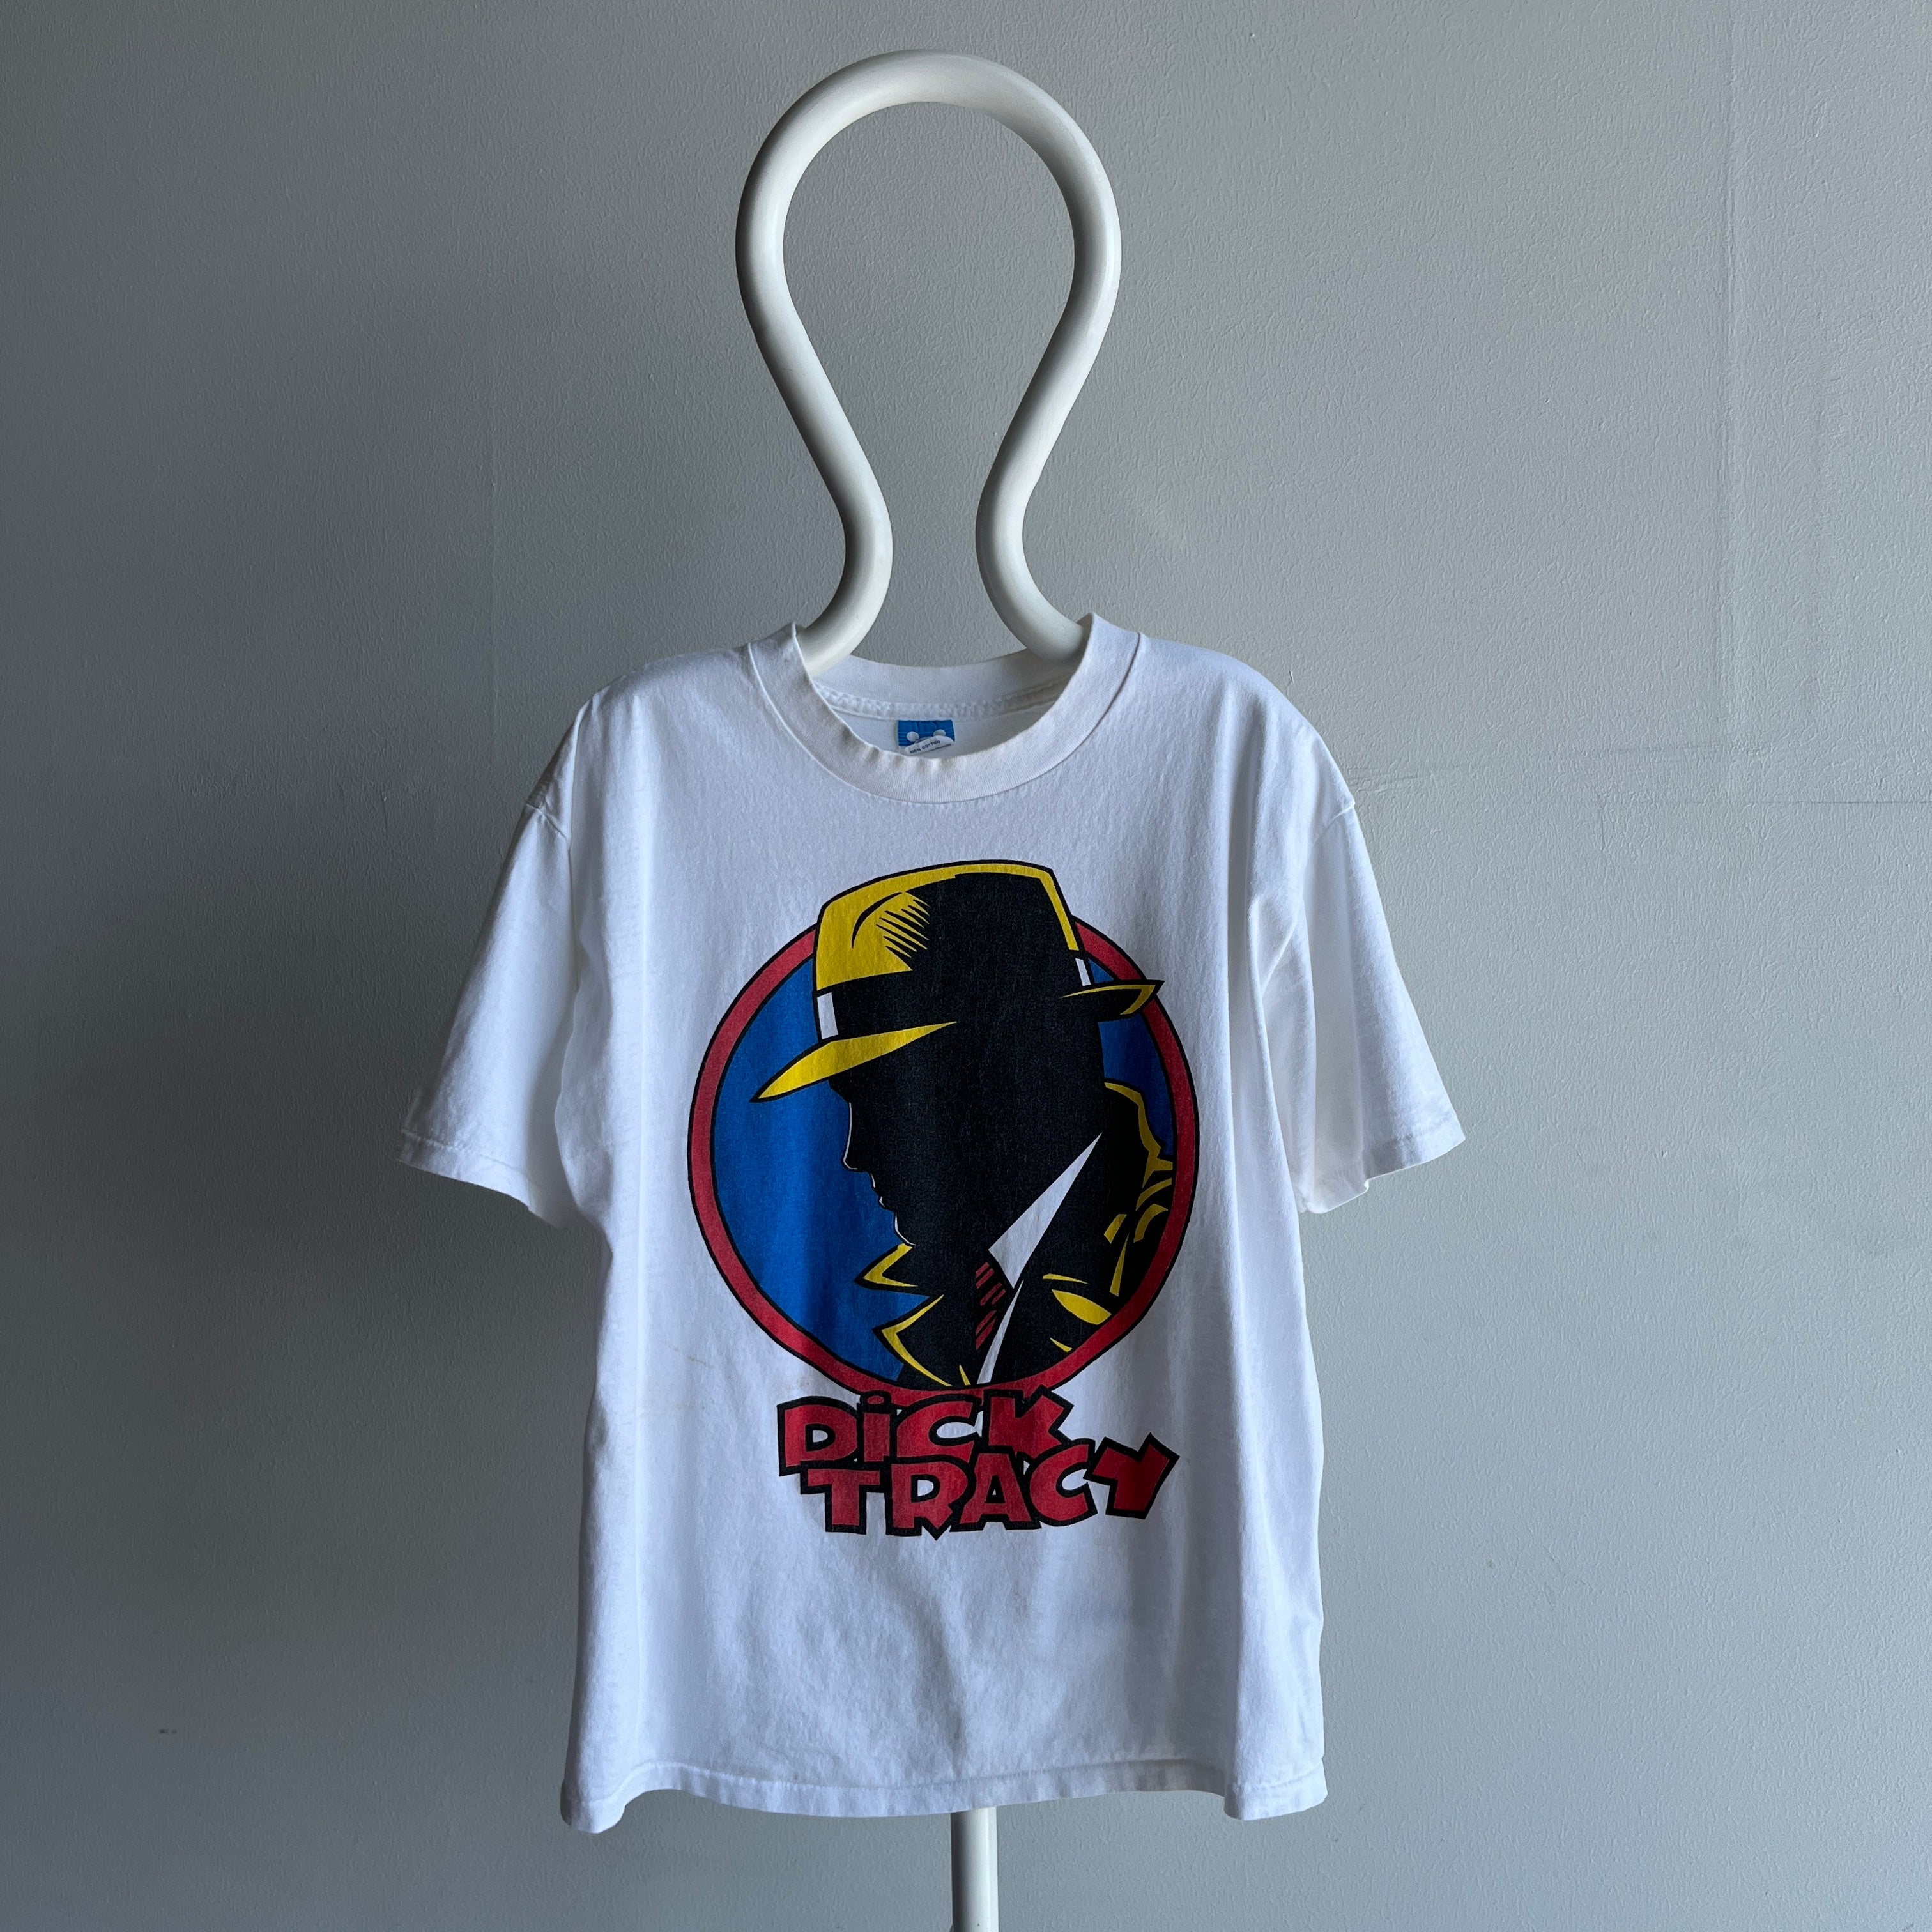 1990 Dick Tracy Cotton T-Shirt by Disney